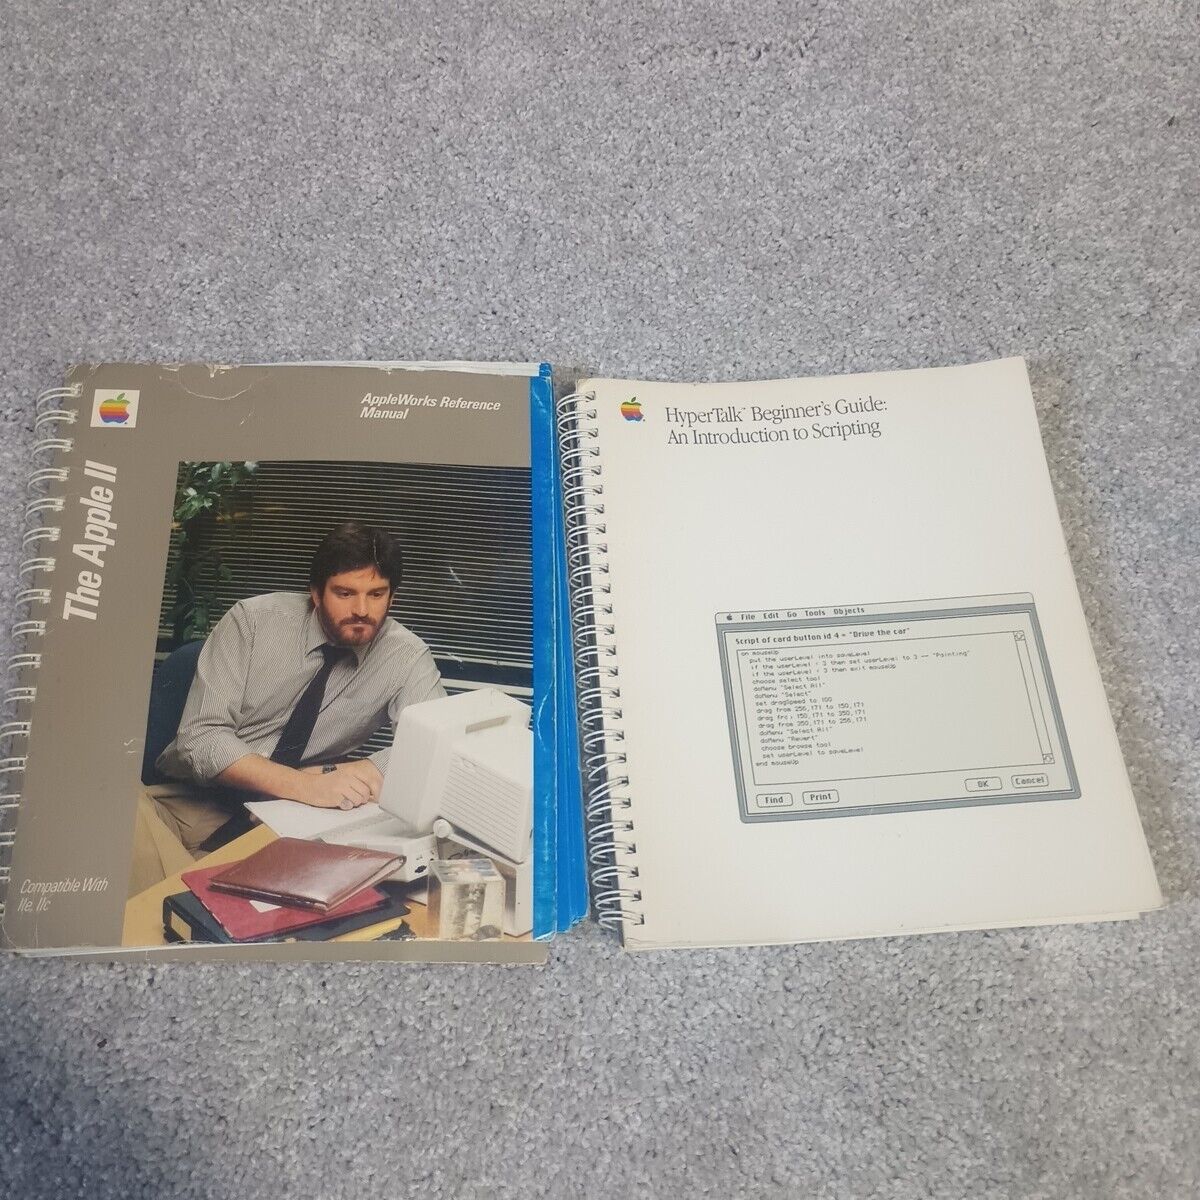 Original The Apple Vintage Apple Manuals Lot Of Two Please See Pictures